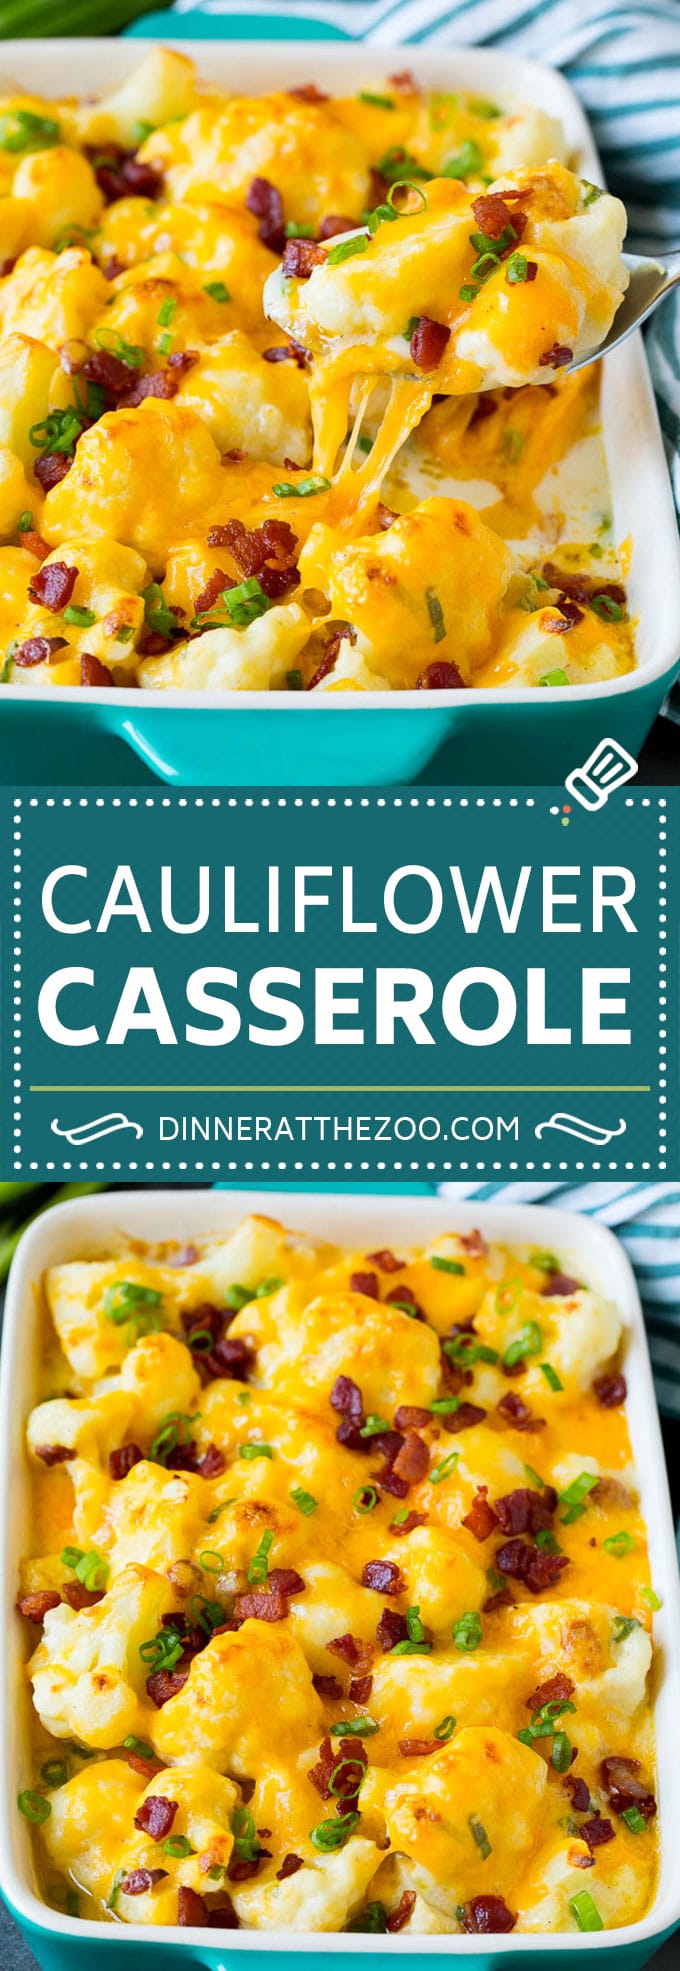 This cauliflower casserole is cooked cauliflower florets tossed in a homemade cheese sauce, then mixed with bacon and green onions and baked to golden brown perfection.